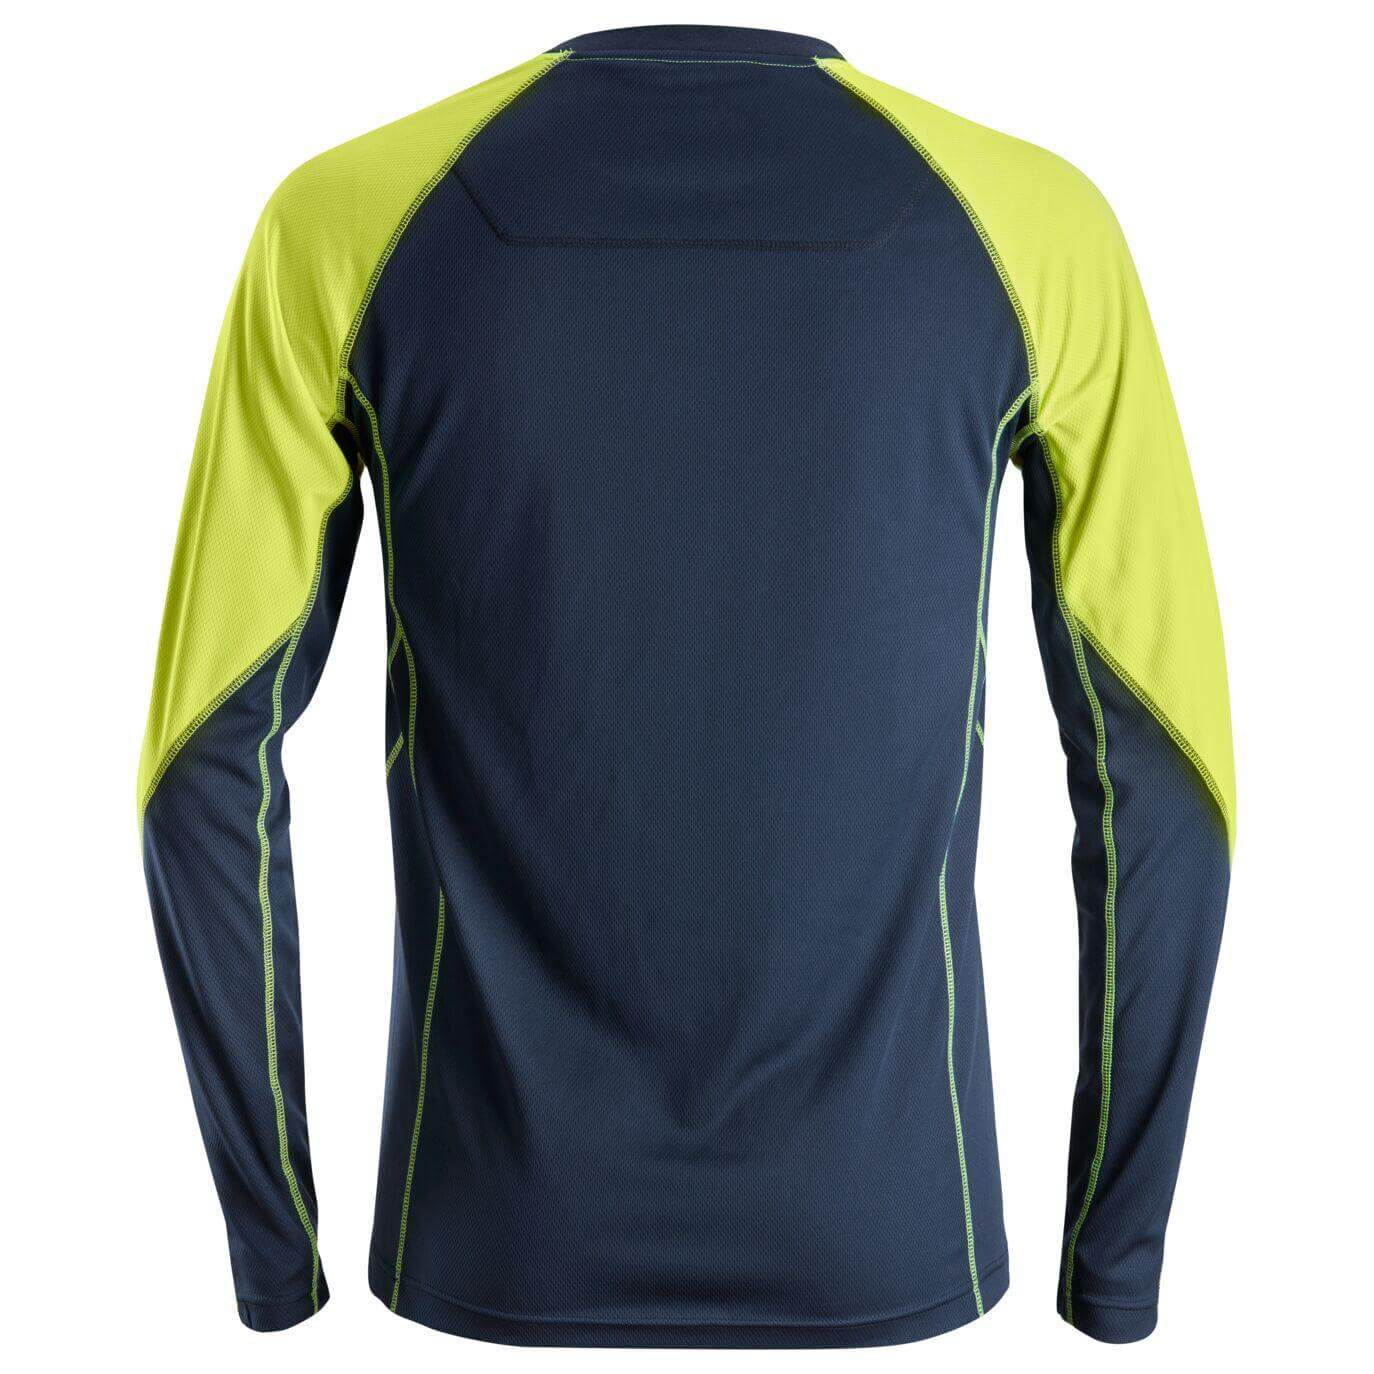 Snickers 2405 AllroundWork Neon Lightweight Long Sleeve T shirt Navy Neon Yellow back #colour_navy-neon-yellow